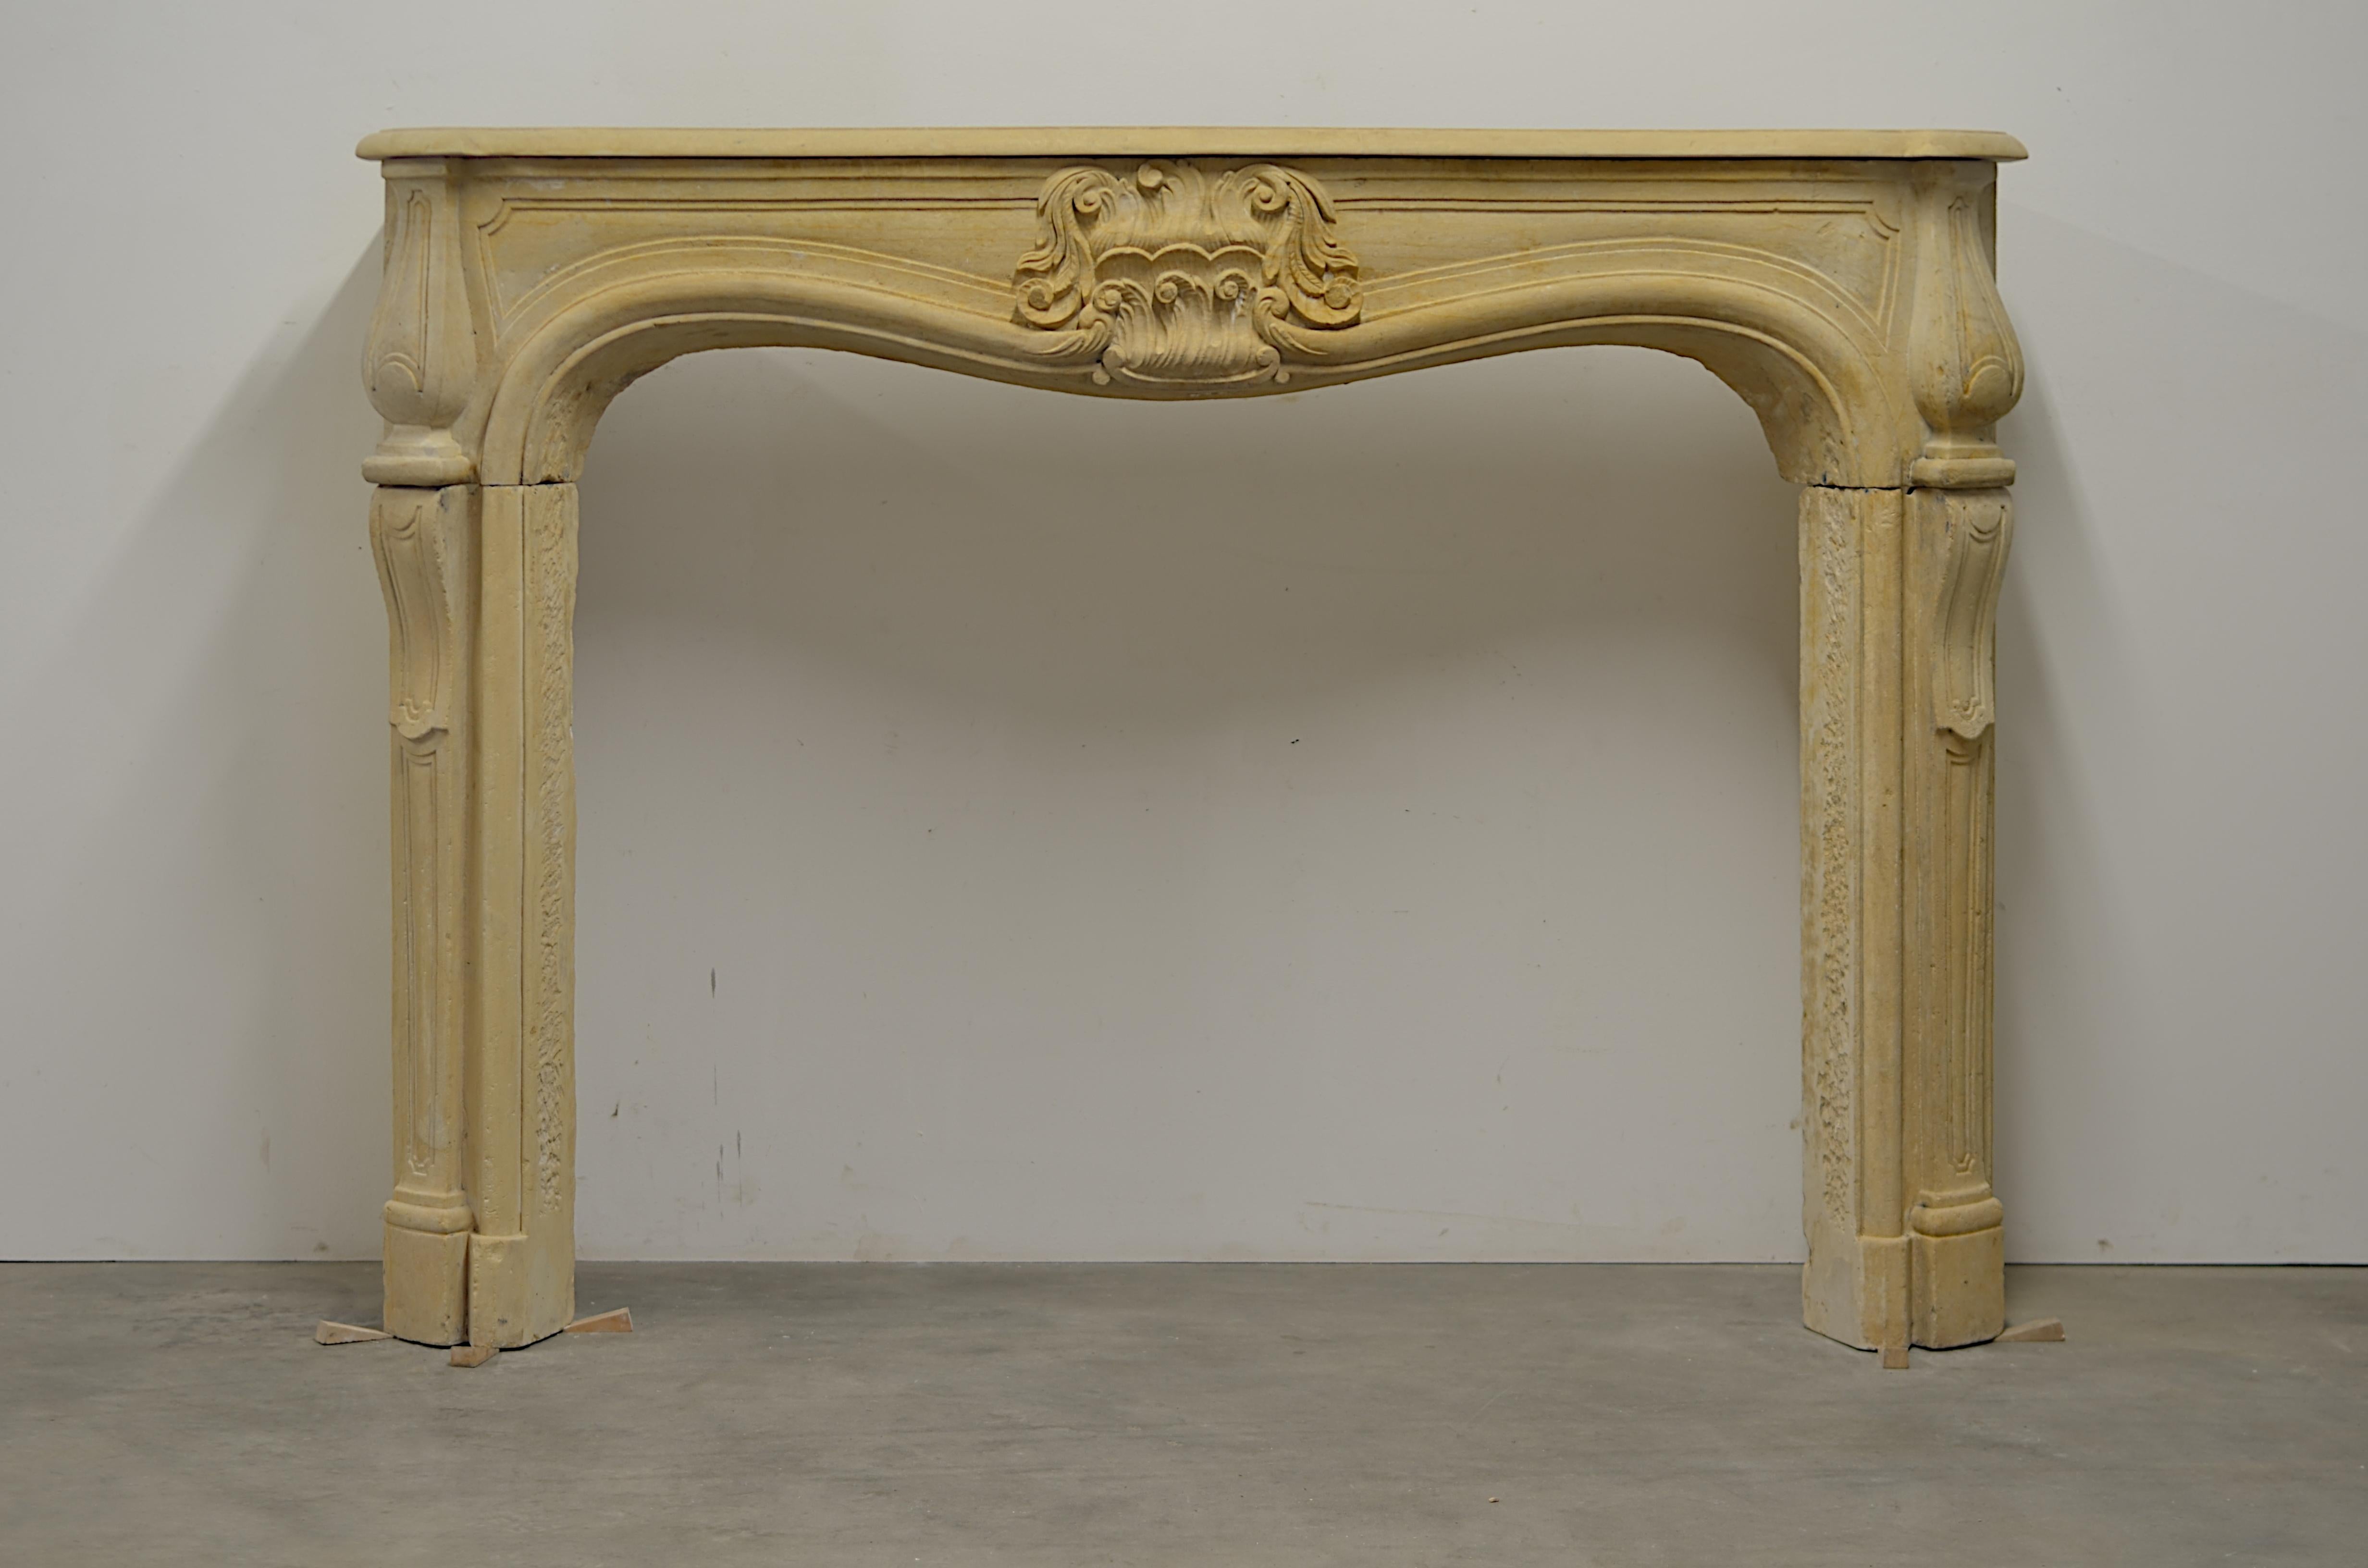 Large and impressive French Louis XV fireplace mantel.
This strong late 18th century has an amazing central cartouche. Its strong, decorative and very crisp even after all those years. 

This makes an amazing statement and is suitable for any kind